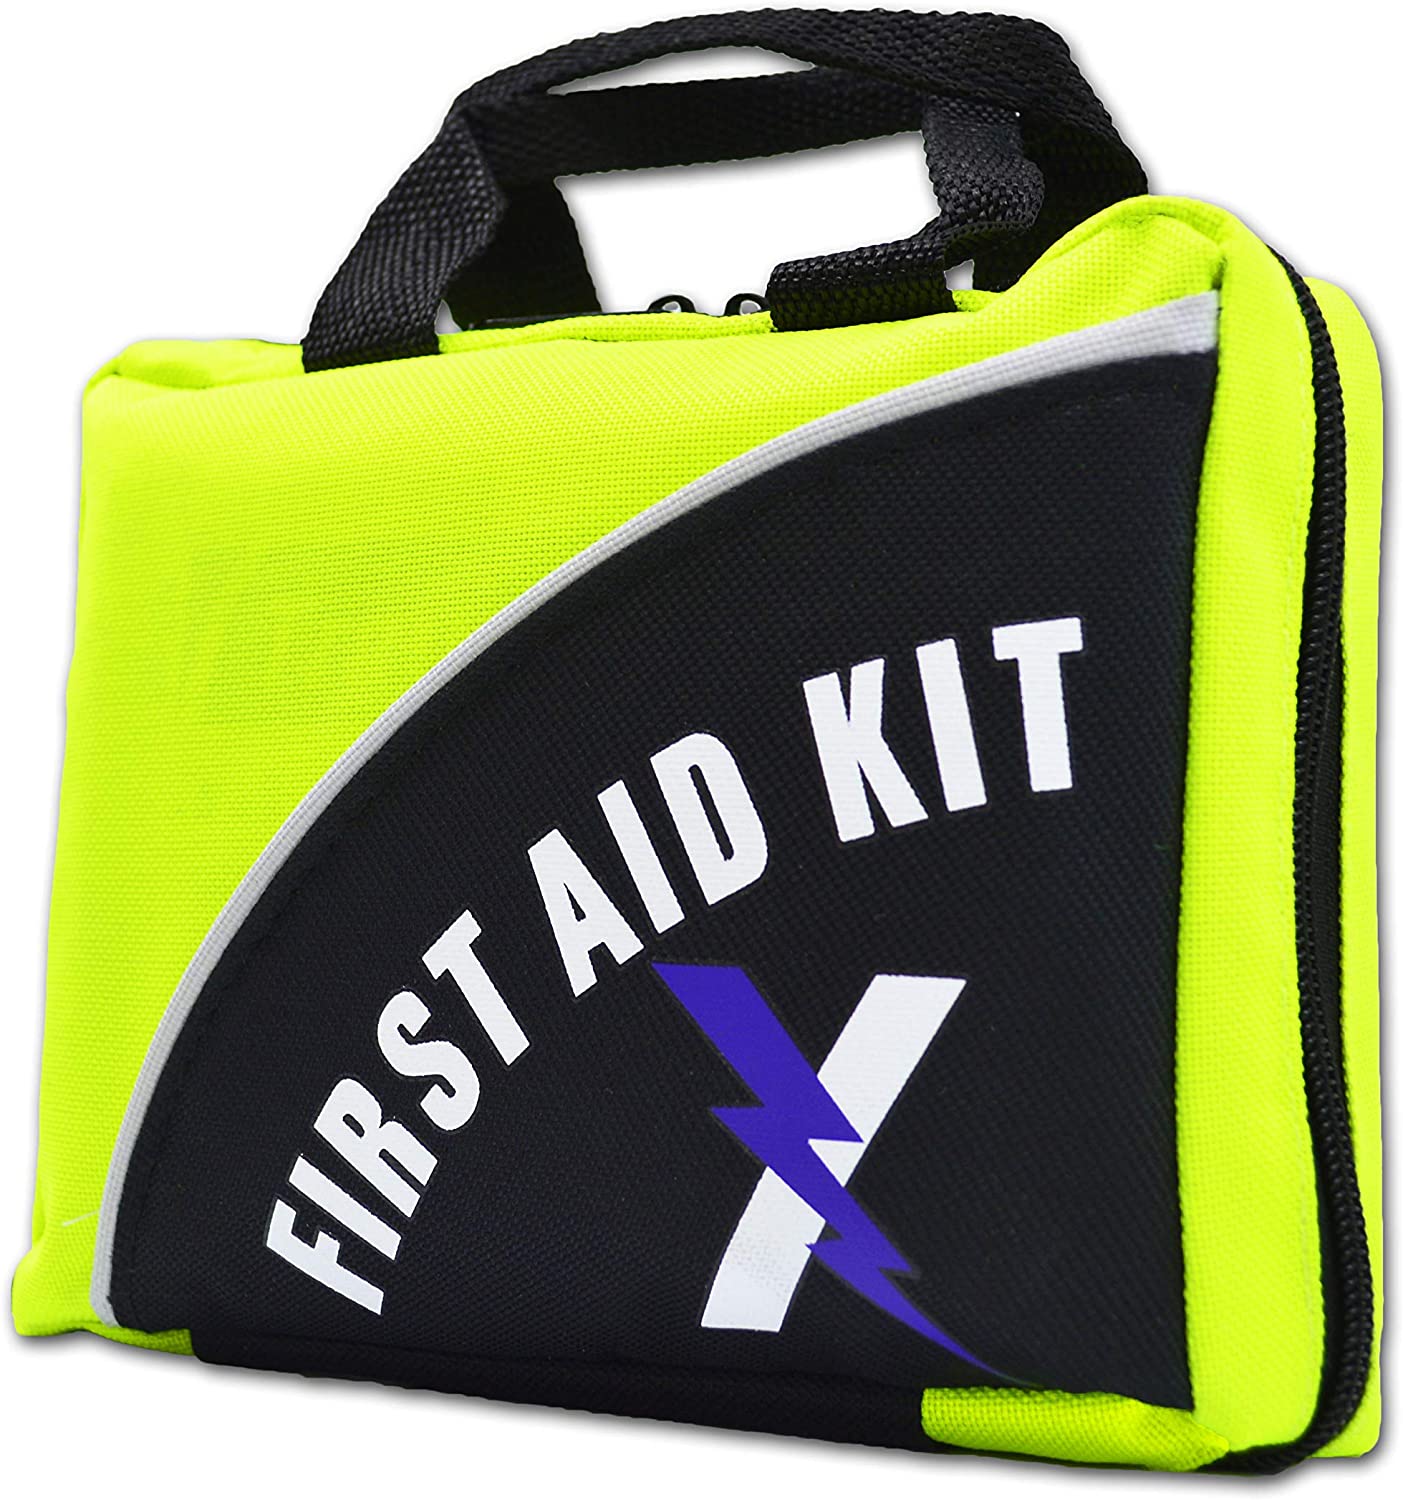 Best Survival First Aid Kits 2022: Reviews & Buyer’s Guide